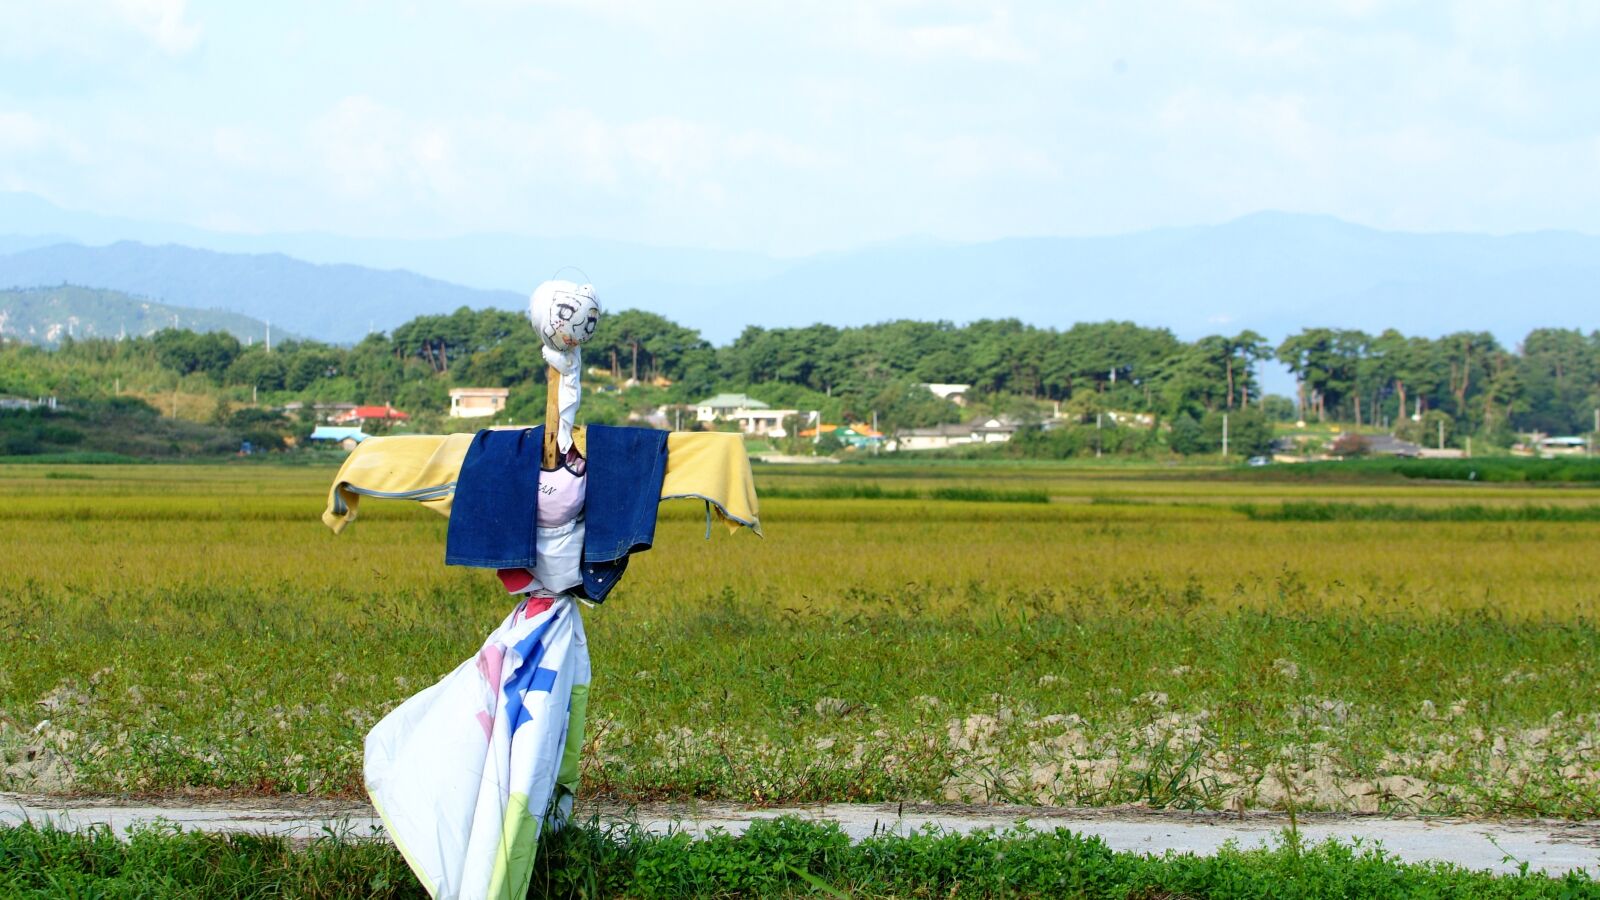 Fujifilm FinePix S3 Pro sample photo. The scarecrow, gangneung, sichuan photography